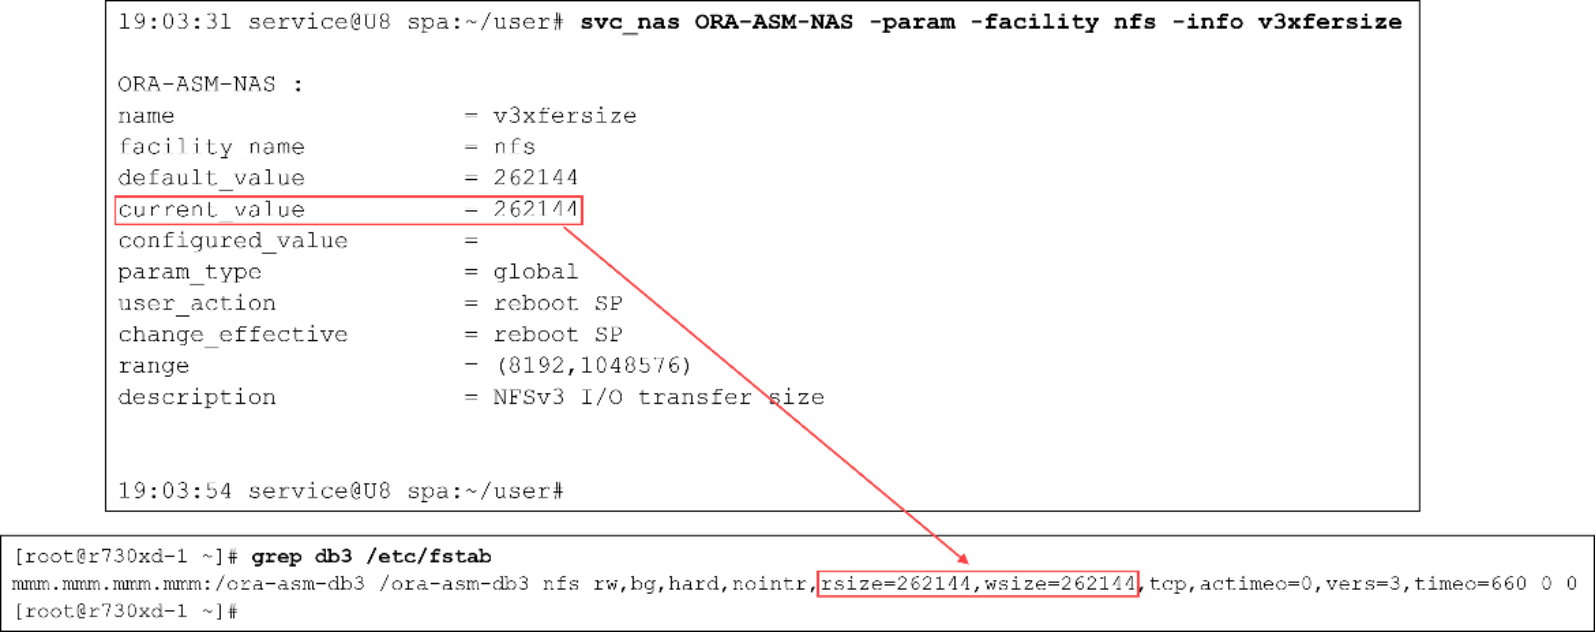 This diagram shows service command: "svc_nas <NAS server name> - param -facility nfs -info v3xfersize" returning a value of 262144 for parameter "current_value".  Therefore, when mounting a file share in Linux that is managed by NAS server <NAS server name>, make sure Linux mount options rsize and wsize are set to 262144.